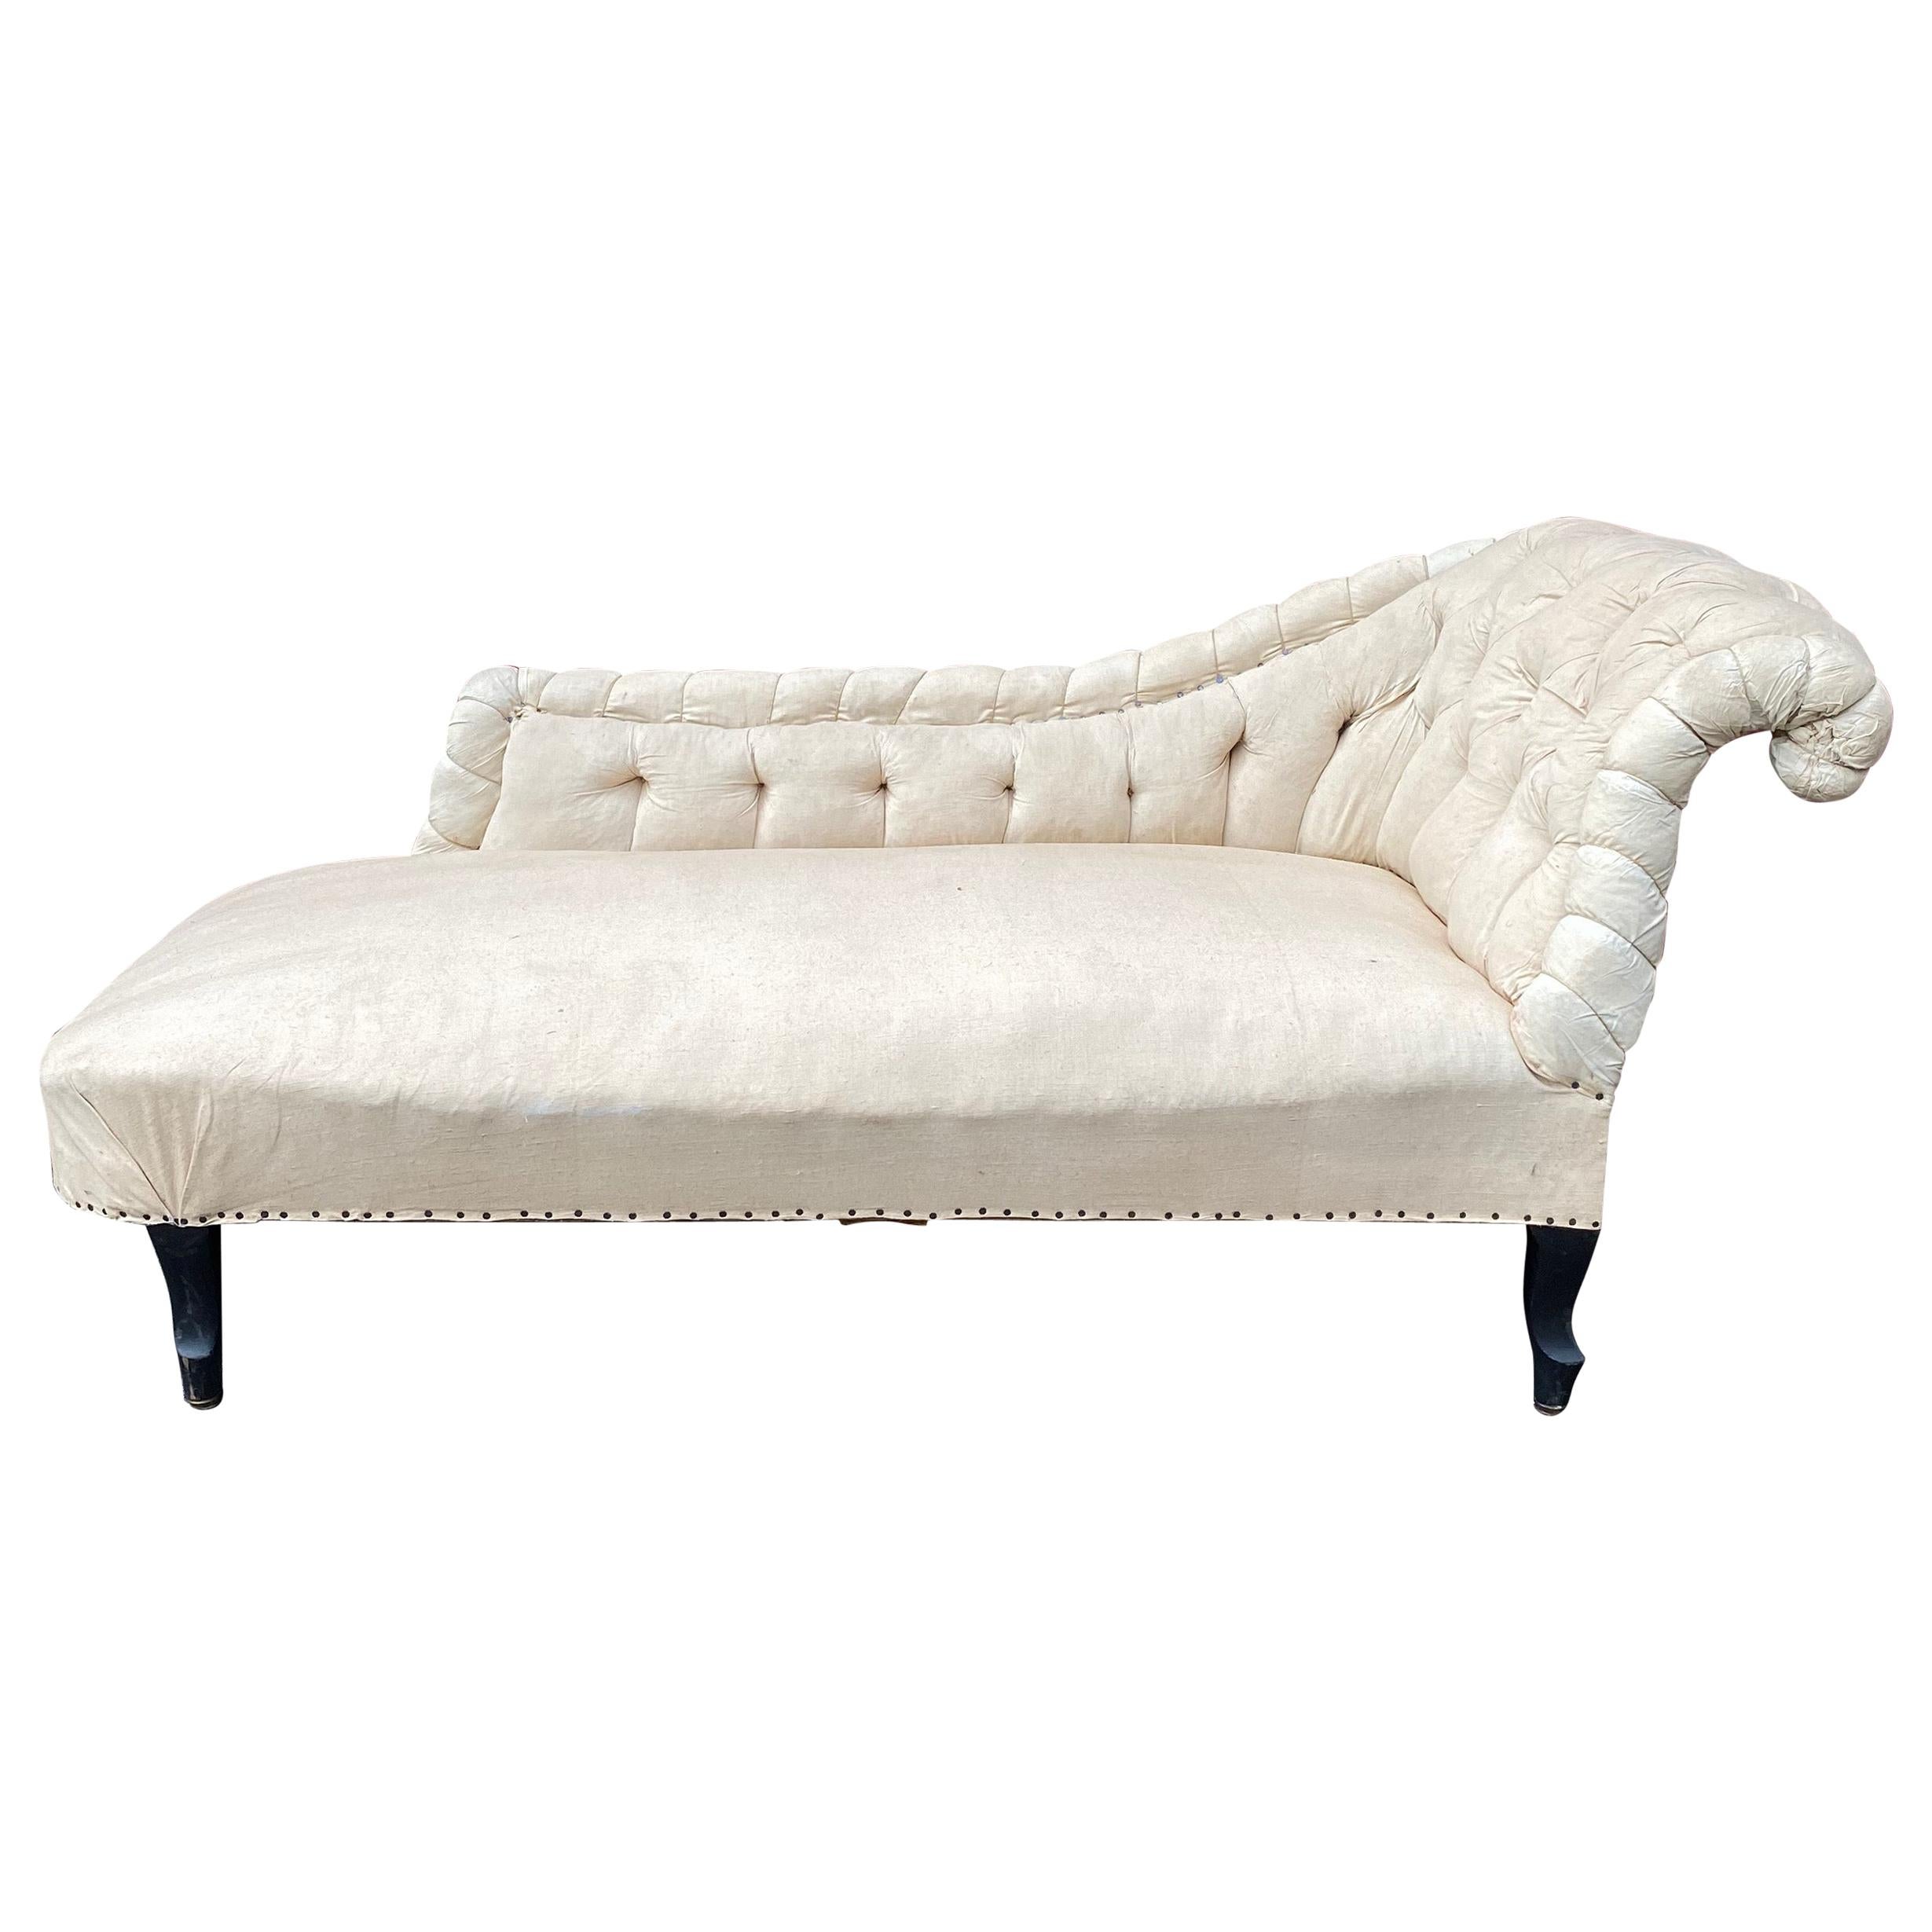 French 19th C Napoleon III Tufted Asymmetrical Chaise Longue